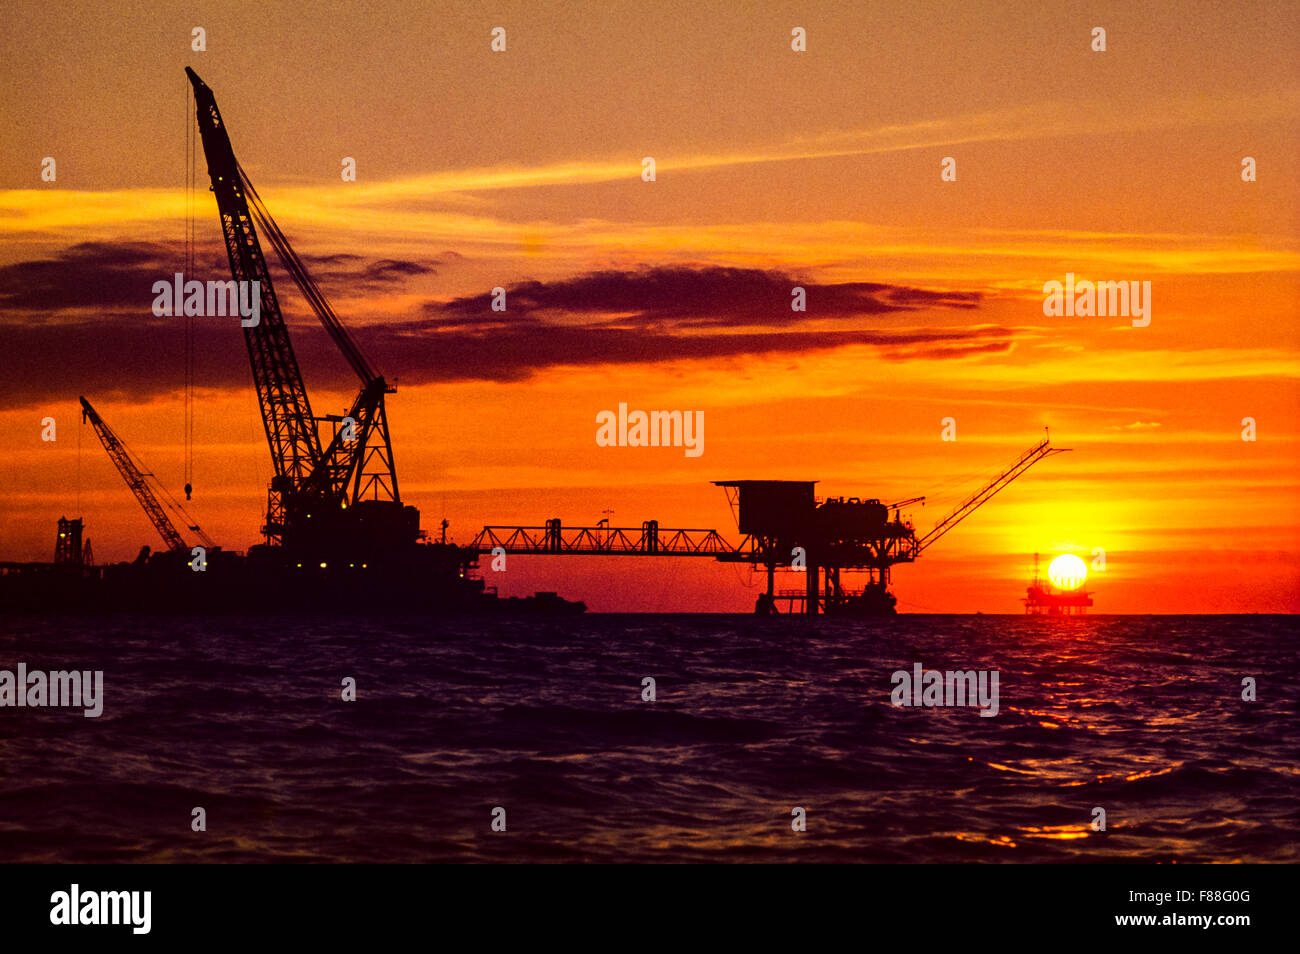 Offshore oil drilling rig with rising sun, Philippines, South East Asia Stock Photo